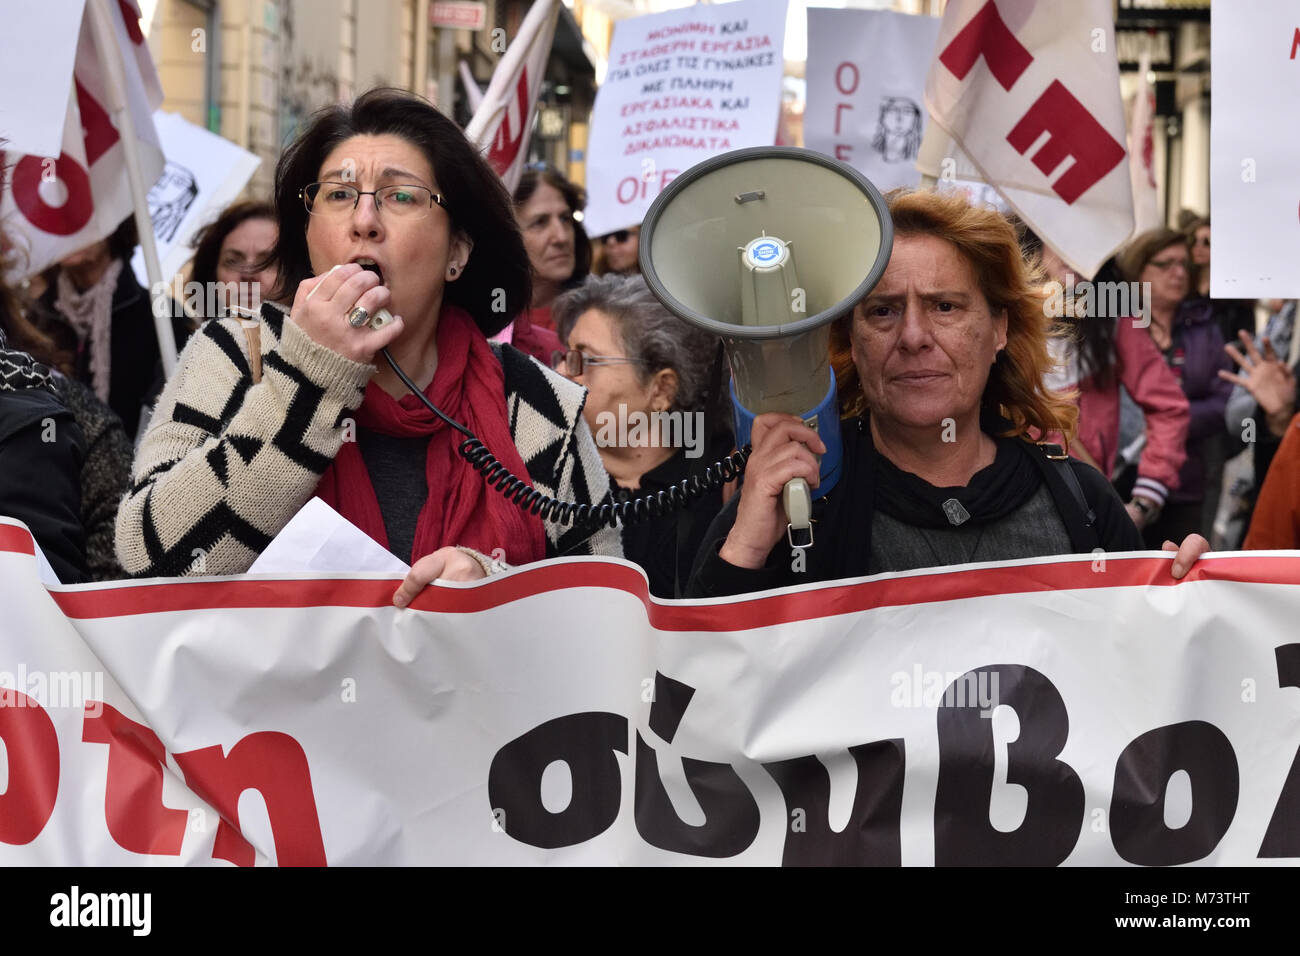 Athens, Greece, 8th March, 2018. Women march chanting slogans to honor the International Women's Day  in Athens, Greece. Credit: Nicolas Koutsokostas/Alamy Live News. Stock Photo